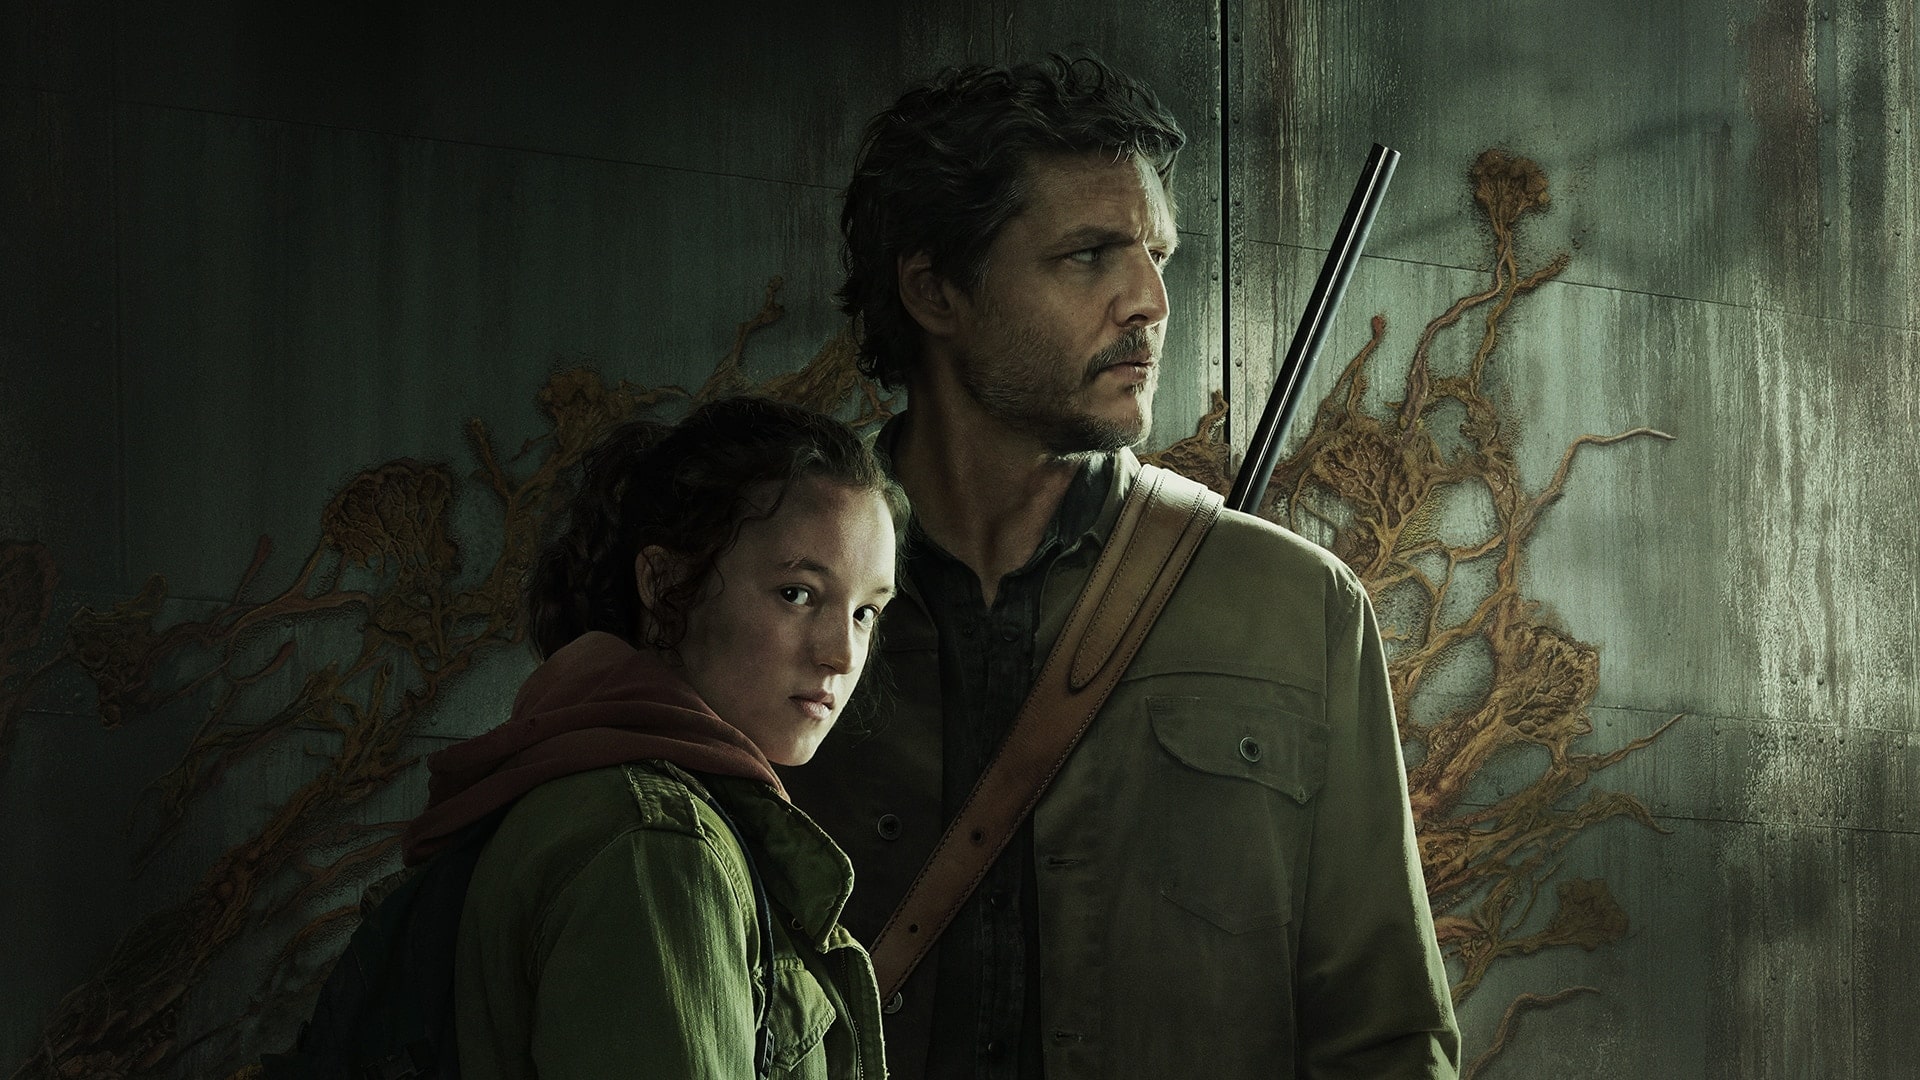 Promotional image for The Last of Us HBO Series showcasing main characters